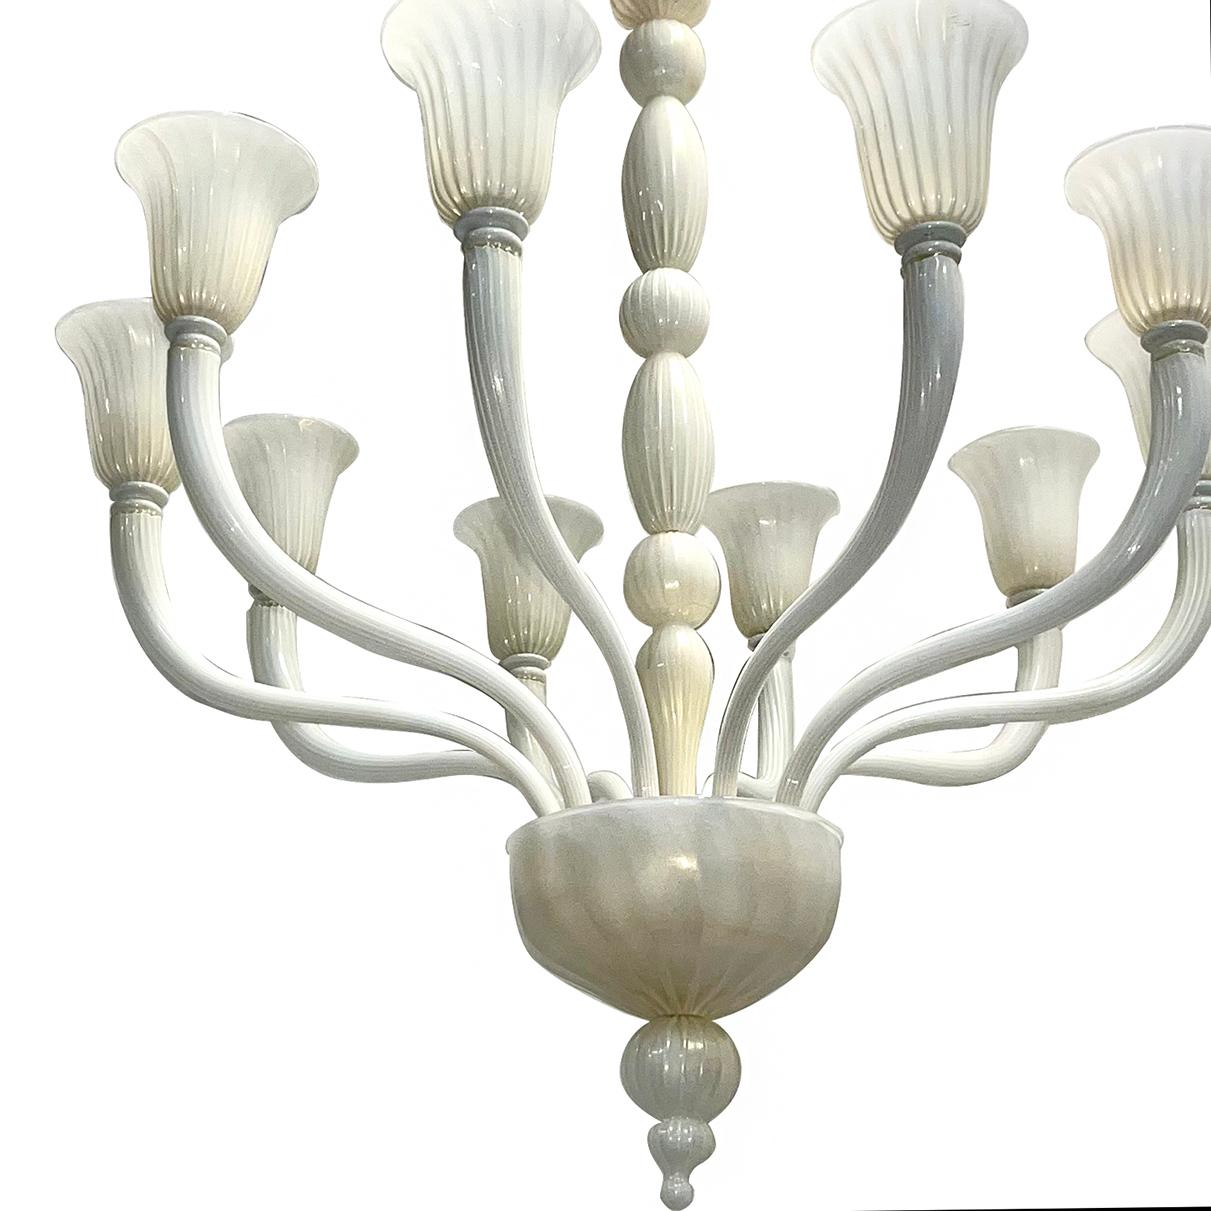 A large circa 1950's Italian Murano glass chandelier with 10 lights.

Measurements:
Diameter: 38